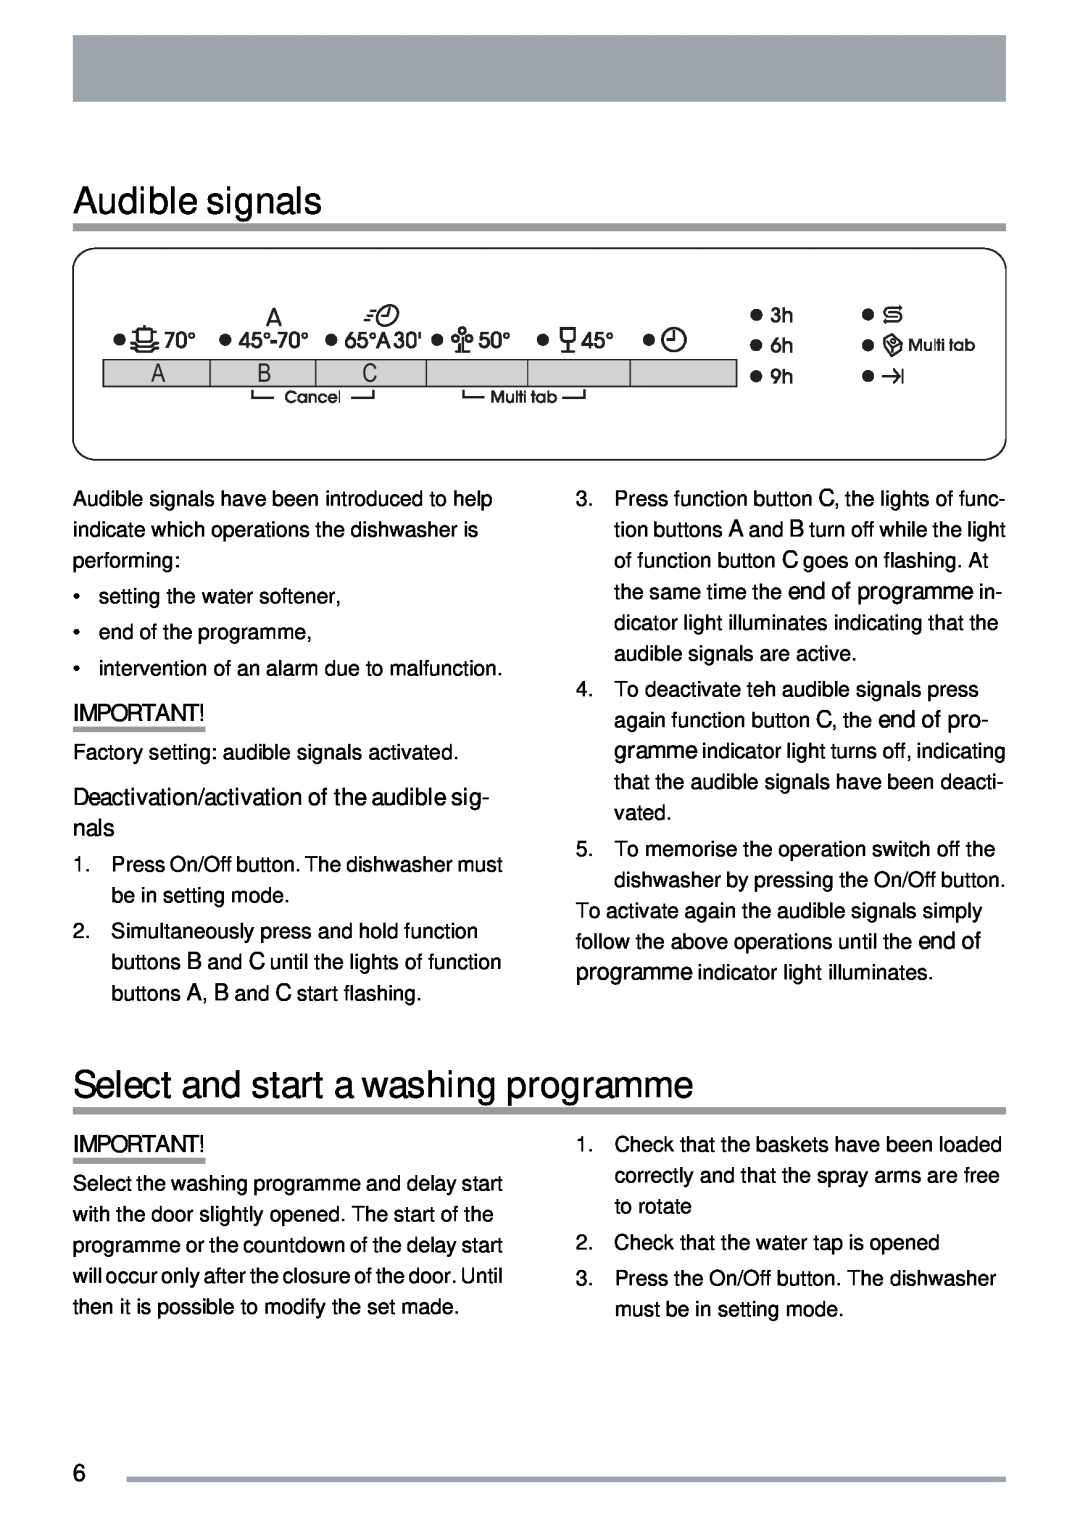 Zanussi ZDT 311 Audible signals, Select and start a washing programme, setting the water softener end of the programme 